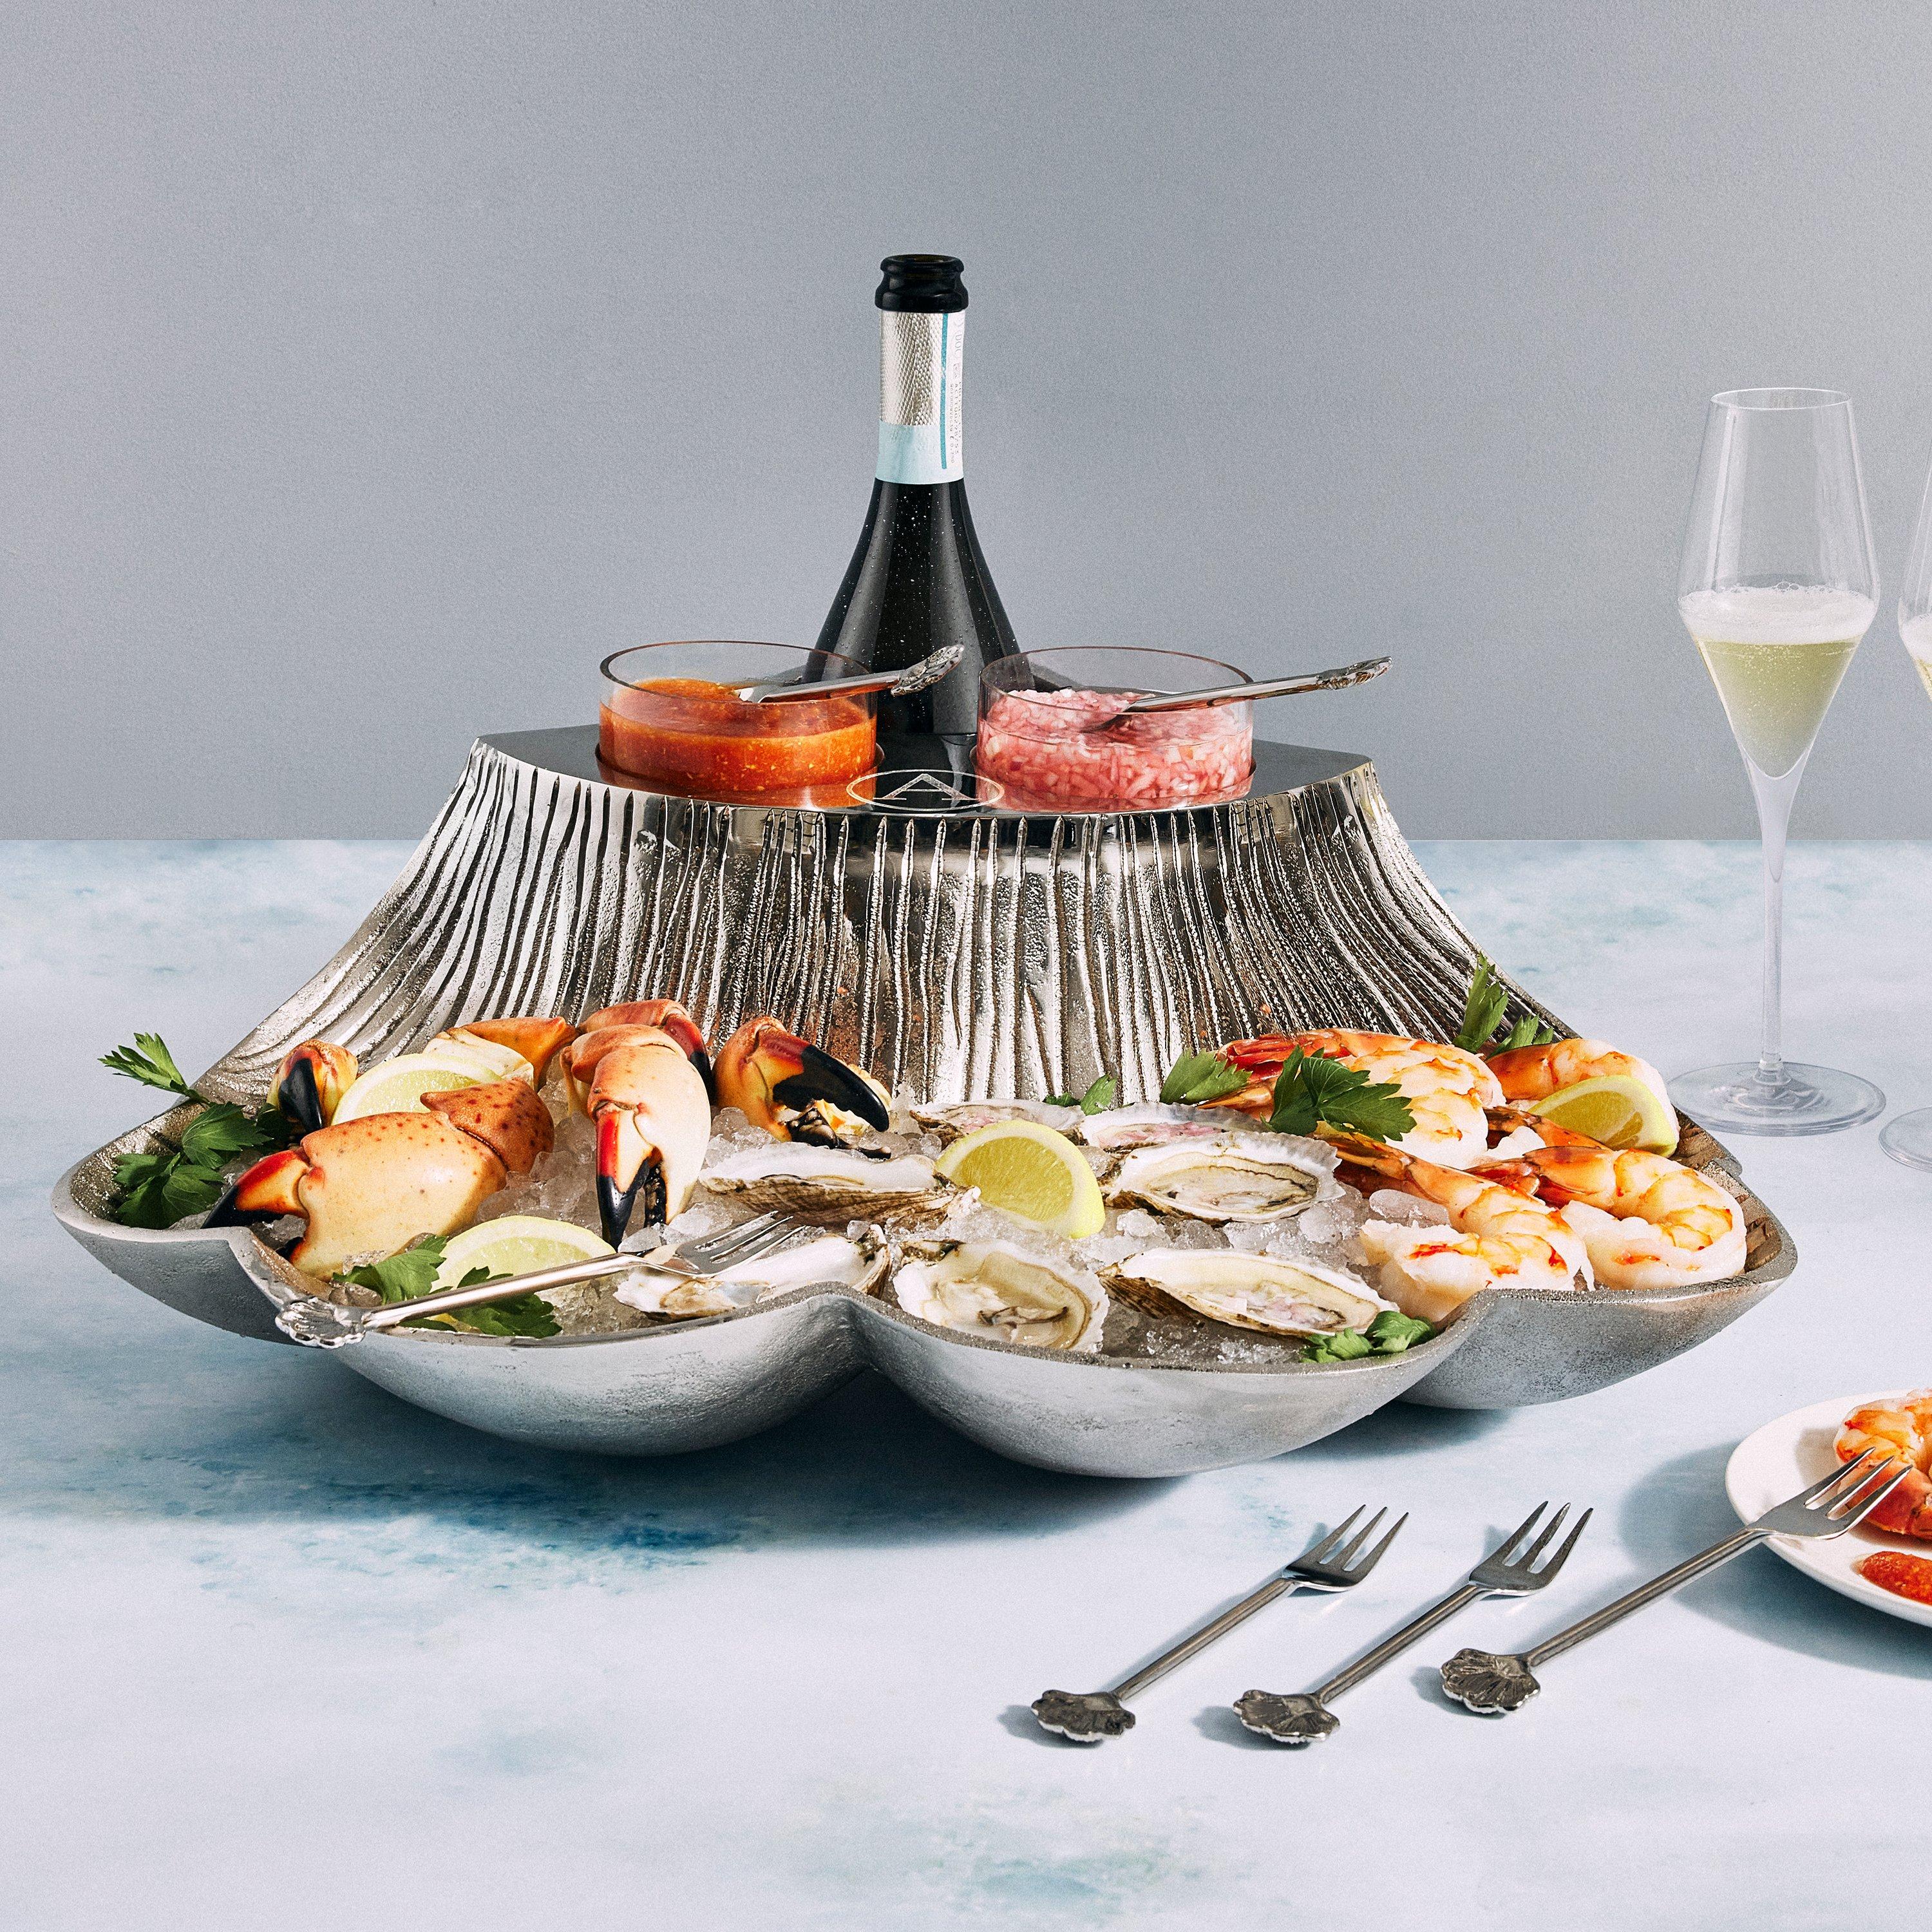 Wine Enthusiast Seafood and Wine Chiller Platter 9-Piece Set ›